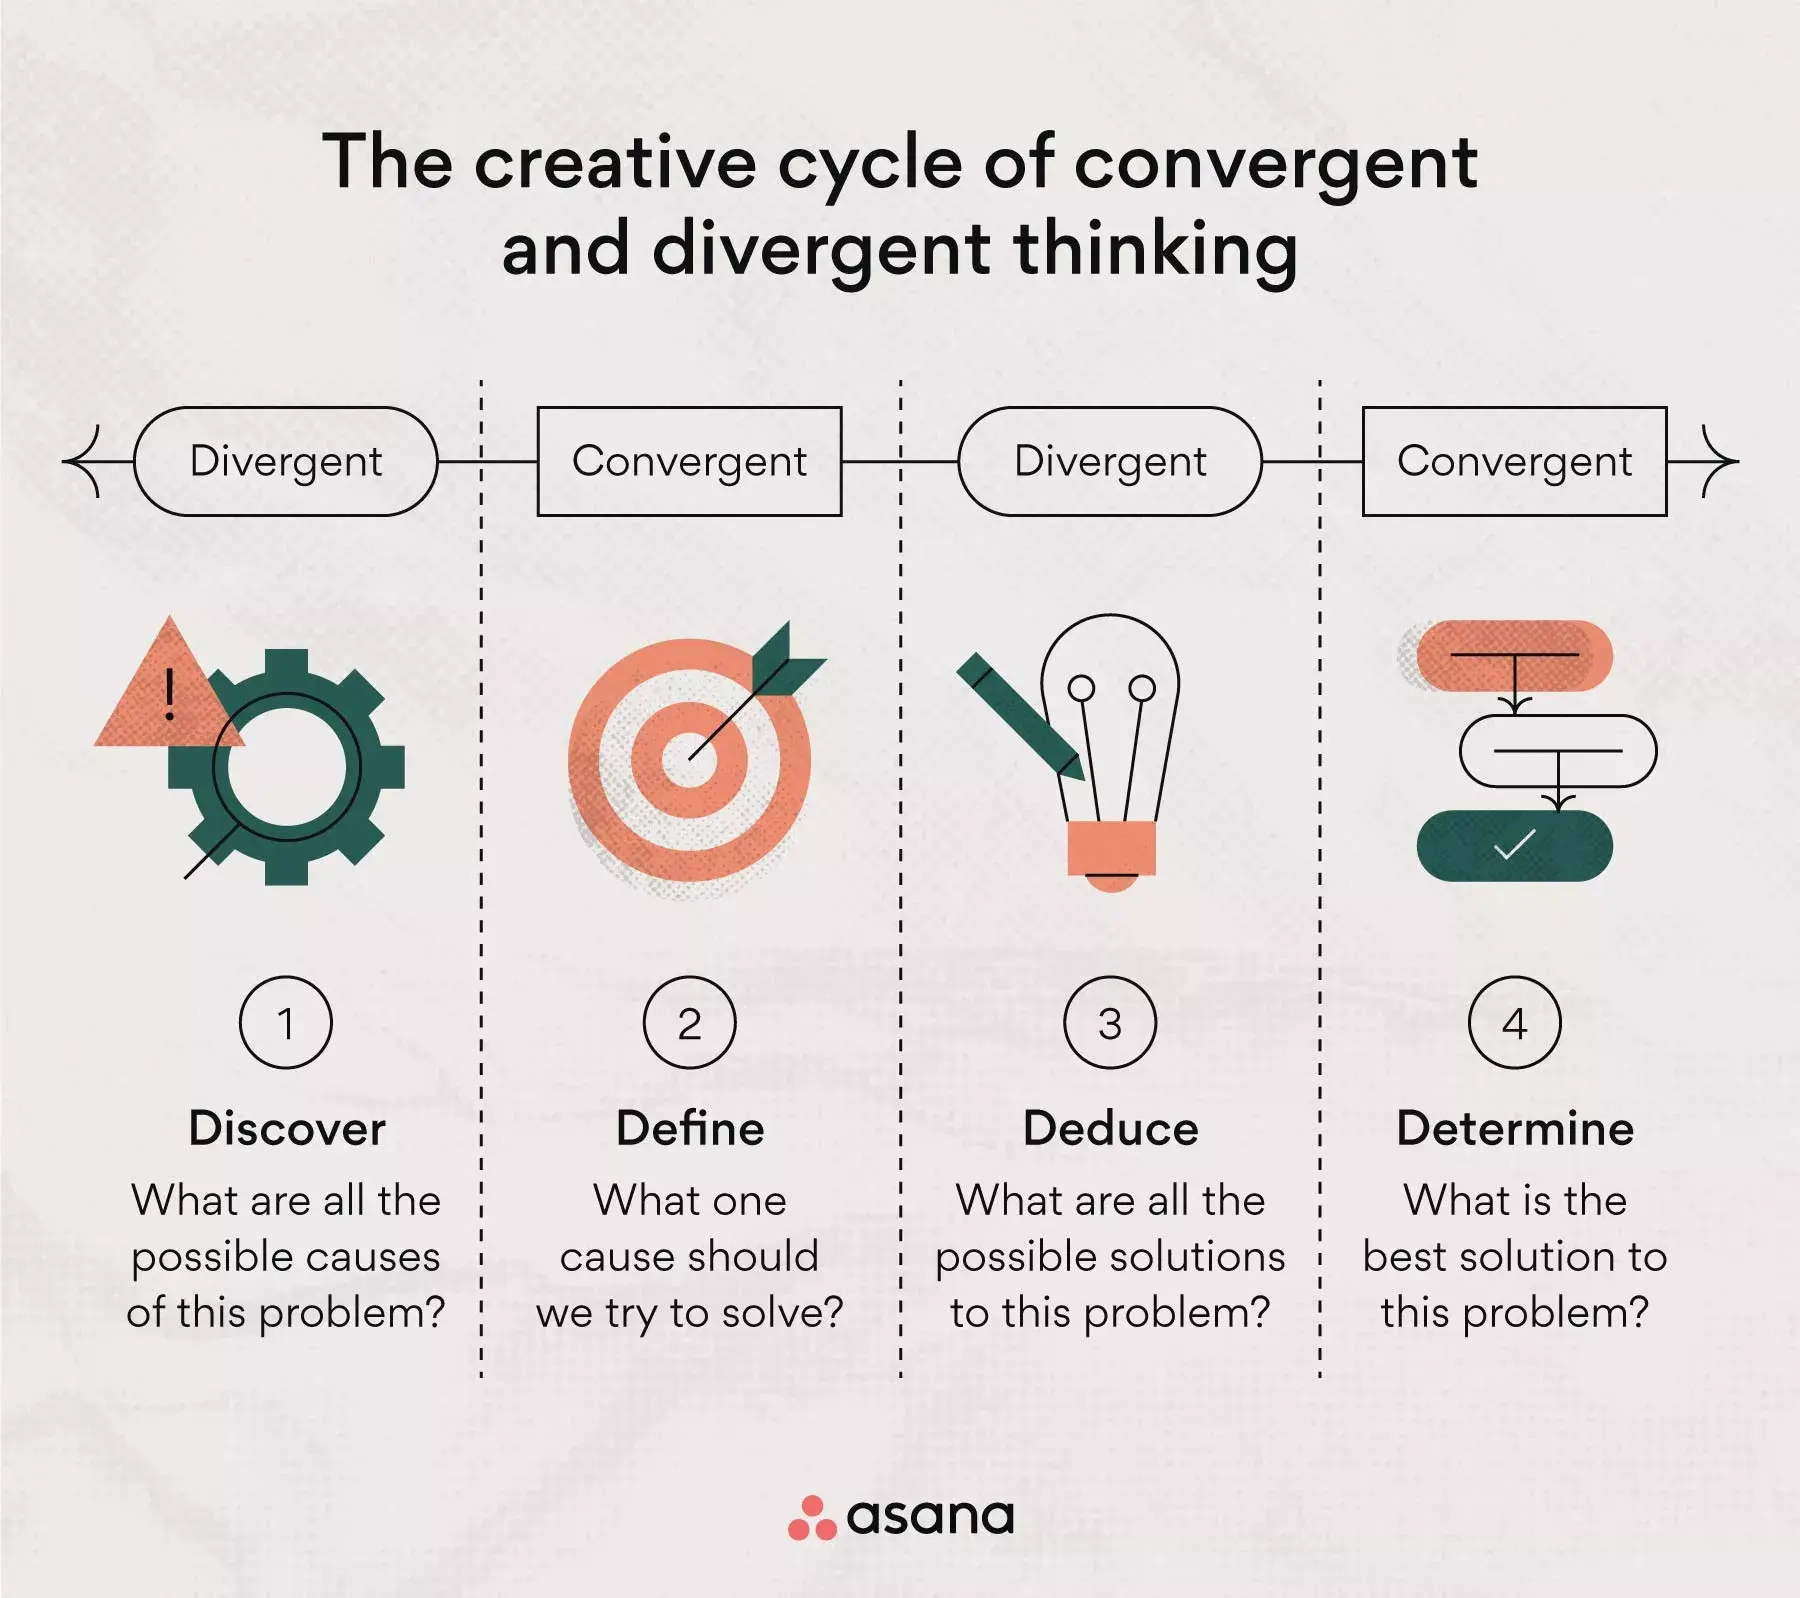 When to use convergent vs. divergent thinking